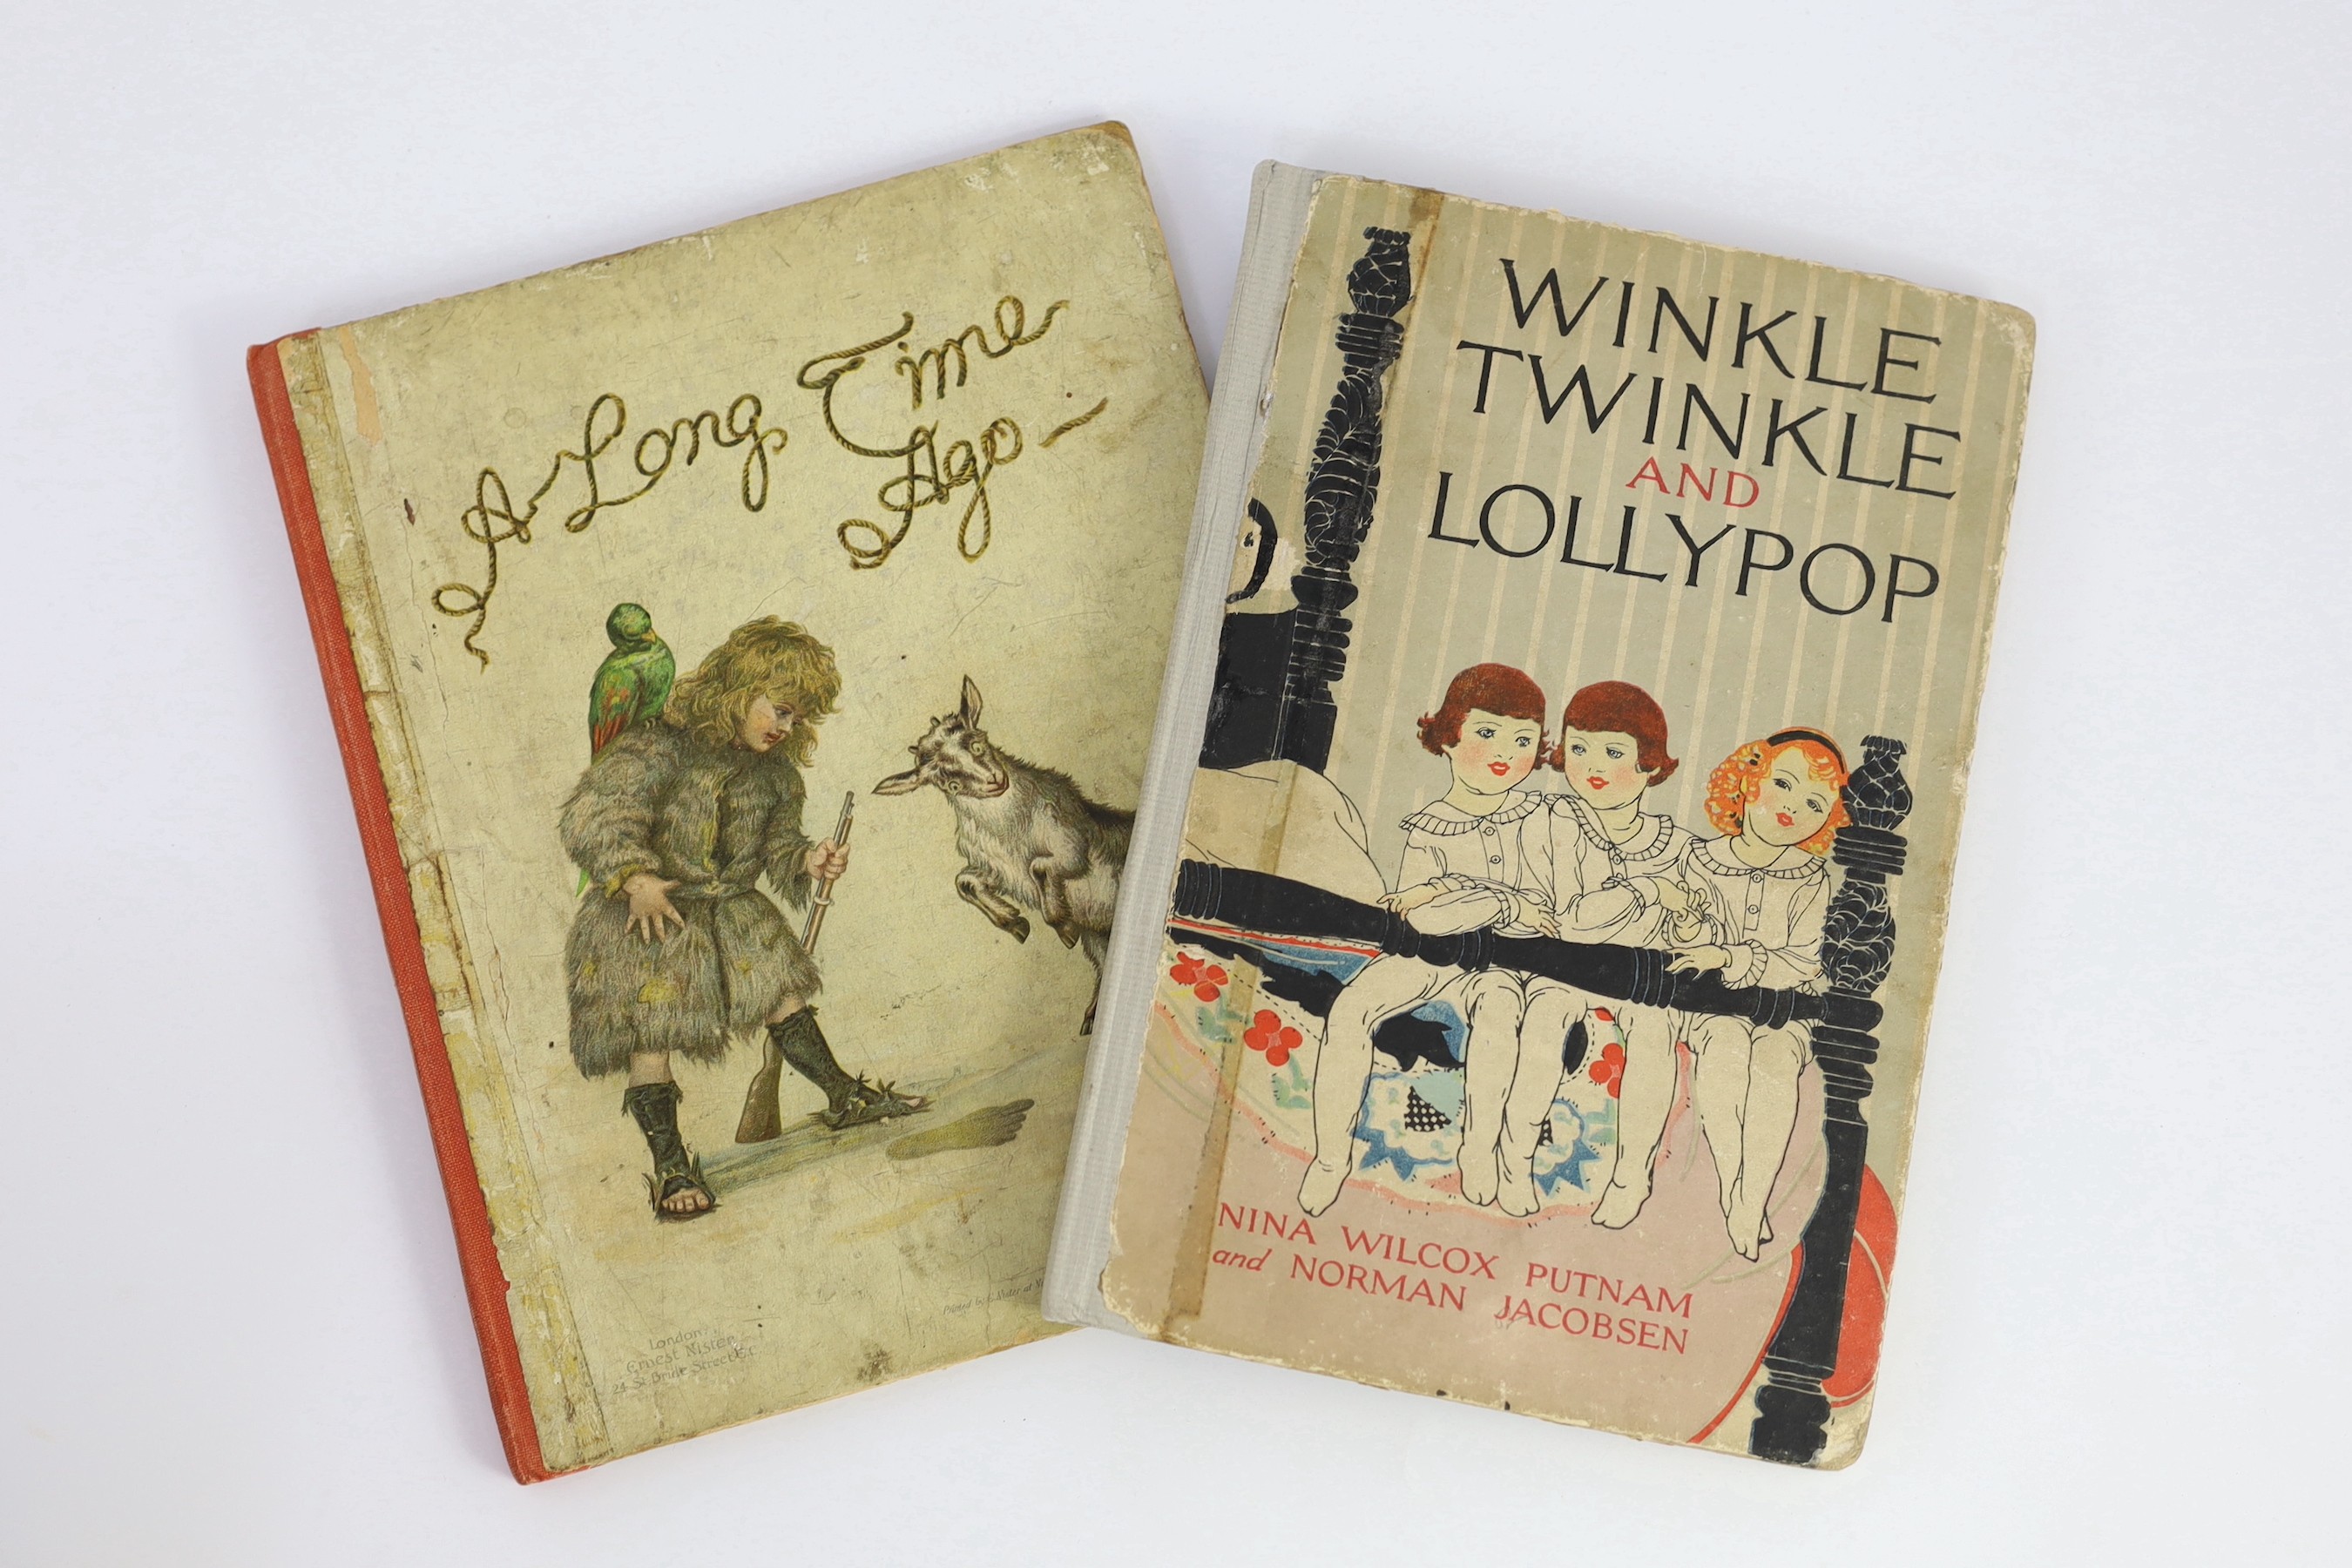 Kingsley, Charles - The Water Babies, illustrated by Jessie Wilcox Smith, 1919; Shakespeare, William - The Merry Wives of Windsor, illustrated by Hugh Thomson, 1910; Barrie, J.M - Peter Pan and Wendy, illustrated by Mabe